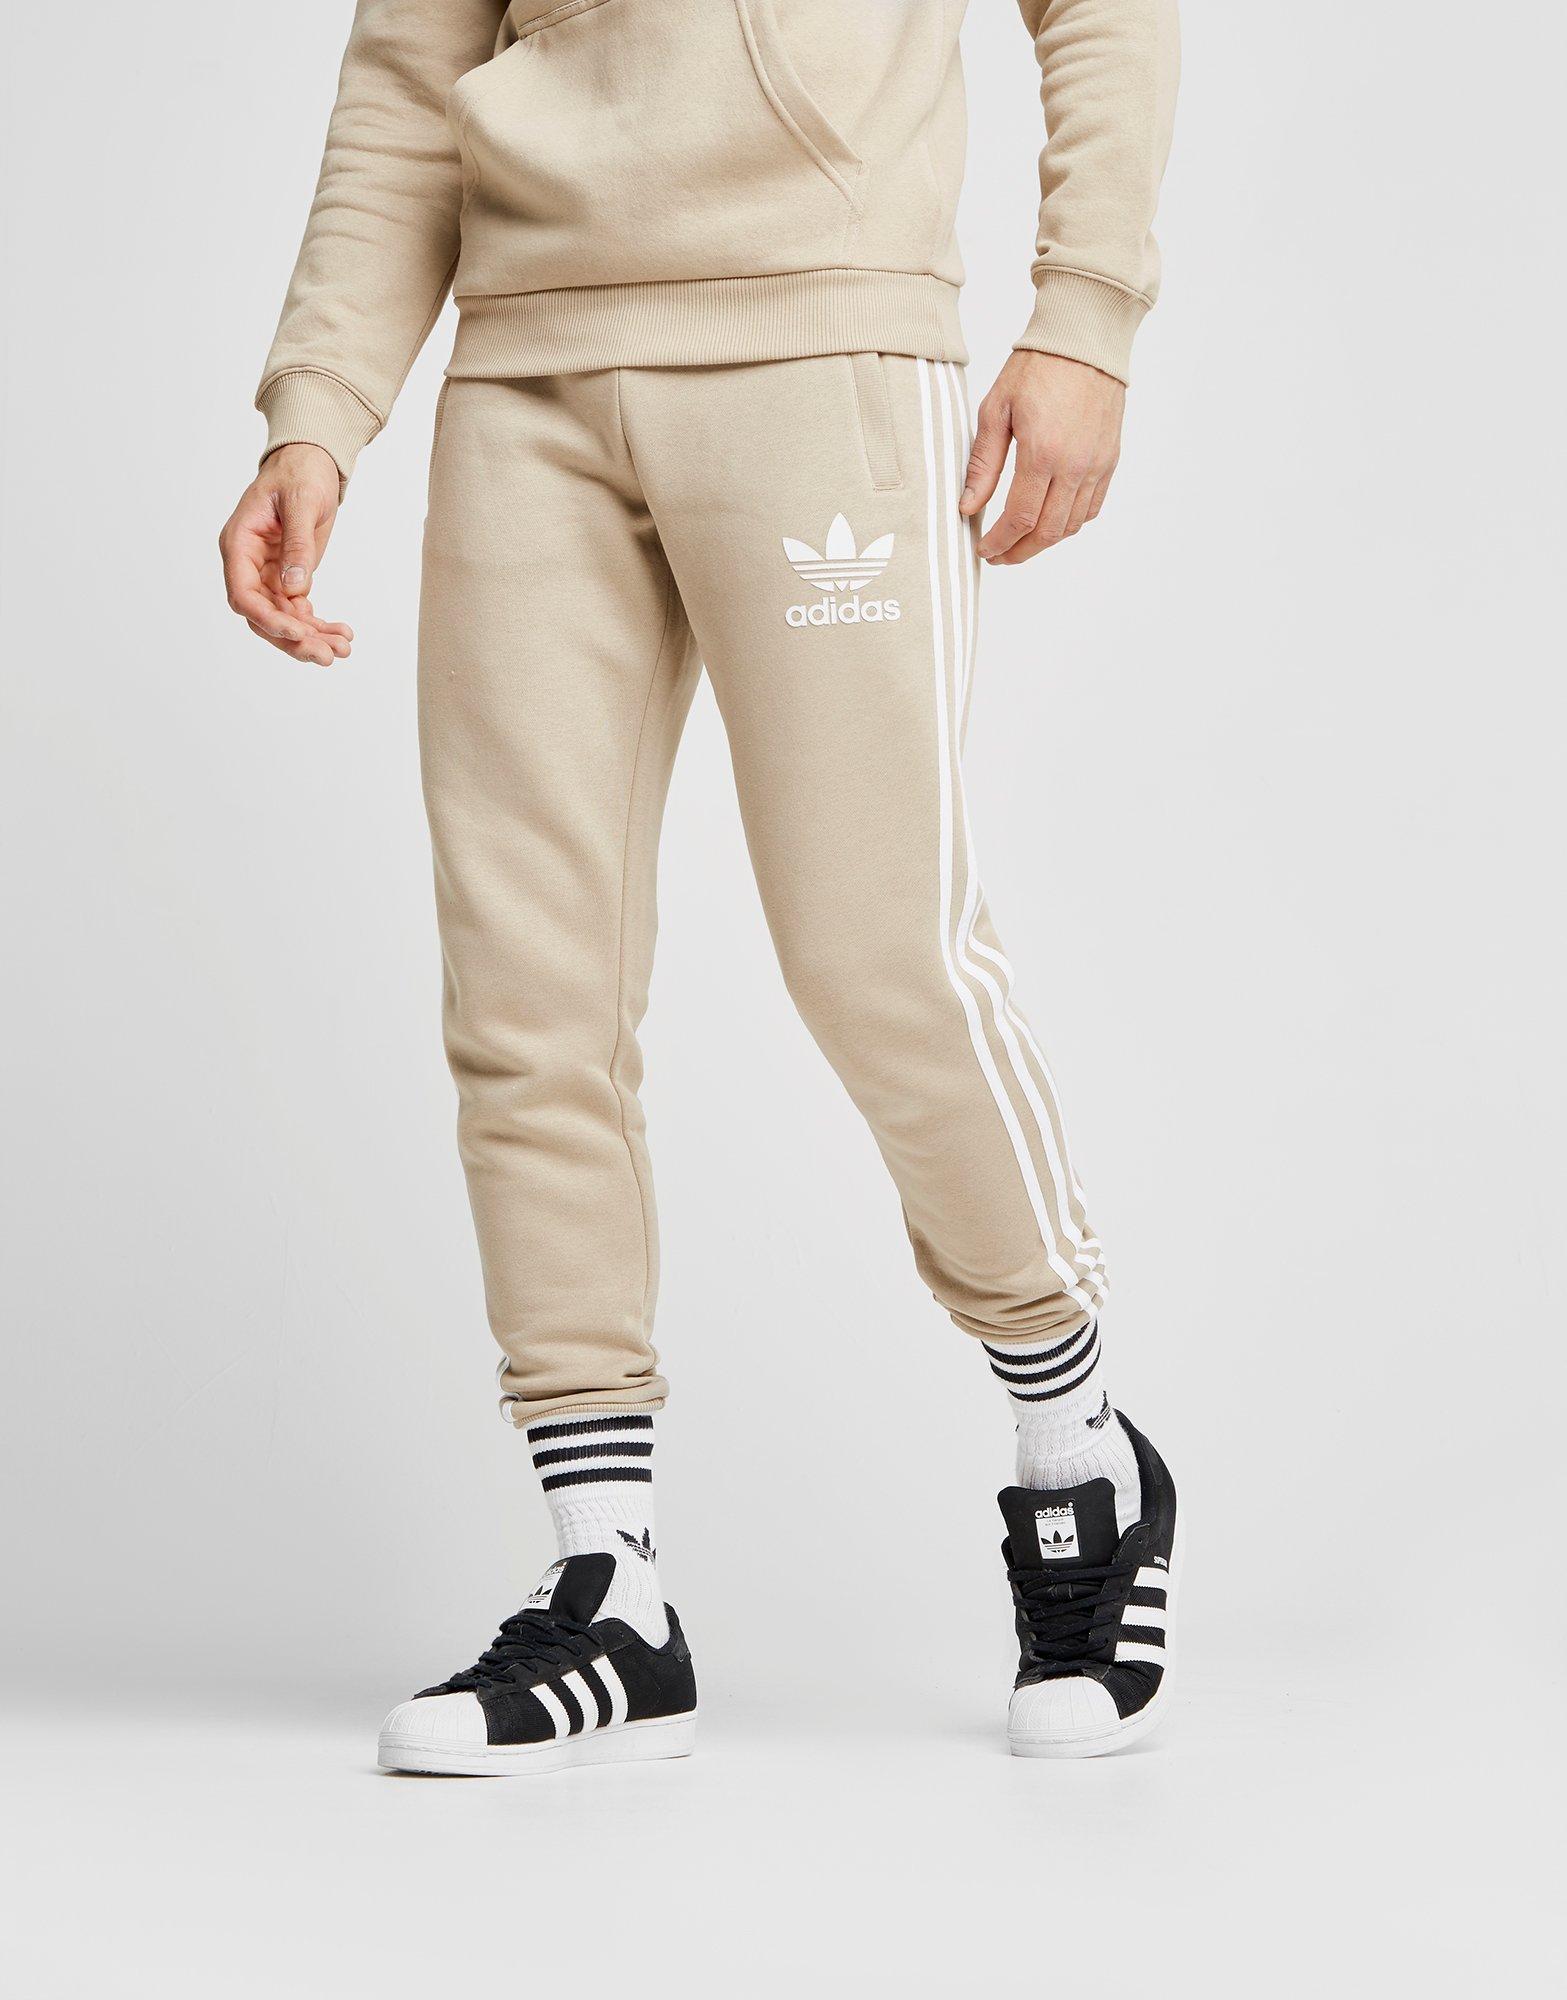 adidas complet homme